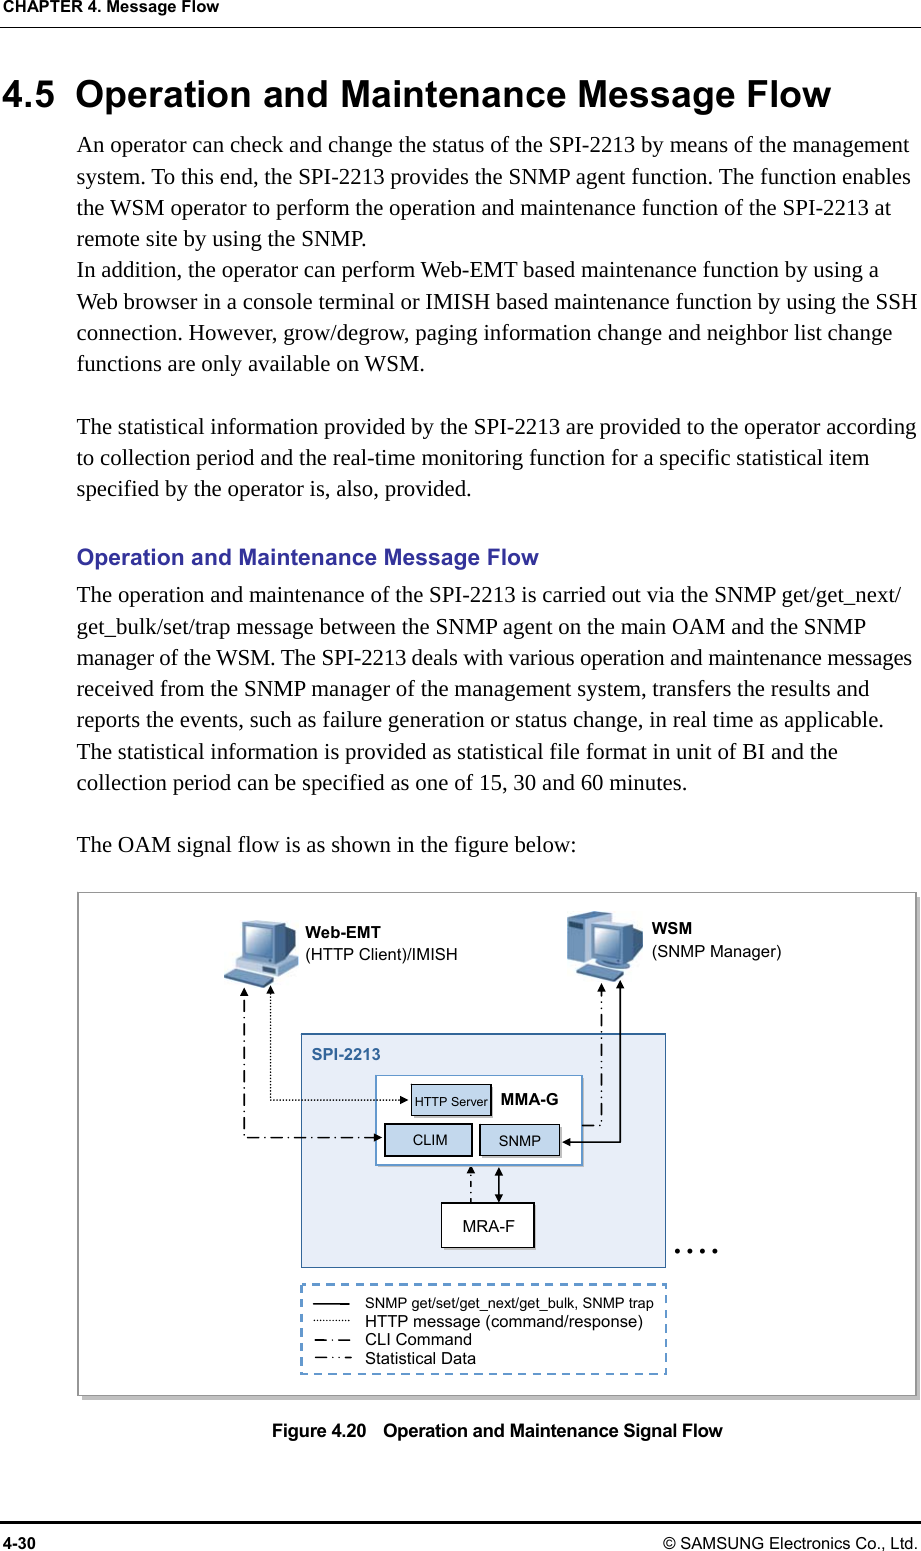 CHAPTER 4. Message Flow 4-30 © SAMSUNG Electronics Co., Ltd. • • • •WSM (SNMP Manager) Web-EMT (HTTP Client)/IMISH MRA-F MMA-GHTTP ServerSNMP CLIM SNMP get/set/get_next/get_bulk, SNMP trap HTTP message (command/response) CLI Command Statistical Data SPI-2213 4.5  Operation and Maintenance Message Flow An operator can check and change the status of the SPI-2213 by means of the management system. To this end, the SPI-2213 provides the SNMP agent function. The function enables the WSM operator to perform the operation and maintenance function of the SPI-2213 at remote site by using the SNMP. In addition, the operator can perform Web-EMT based maintenance function by using a Web browser in a console terminal or IMISH based maintenance function by using the SSH connection. However, grow/degrow, paging information change and neighbor list change functions are only available on WSM.  The statistical information provided by the SPI-2213 are provided to the operator according to collection period and the real-time monitoring function for a specific statistical item specified by the operator is, also, provided.  Operation and Maintenance Message Flow The operation and maintenance of the SPI-2213 is carried out via the SNMP get/get_next/ get_bulk/set/trap message between the SNMP agent on the main OAM and the SNMP manager of the WSM. The SPI-2213 deals with various operation and maintenance messages received from the SNMP manager of the management system, transfers the results and reports the events, such as failure generation or status change, in real time as applicable. The statistical information is provided as statistical file format in unit of BI and the collection period can be specified as one of 15, 30 and 60 minutes.  The OAM signal flow is as shown in the figure below:  Figure 4.20    Operation and Maintenance Signal Flow 